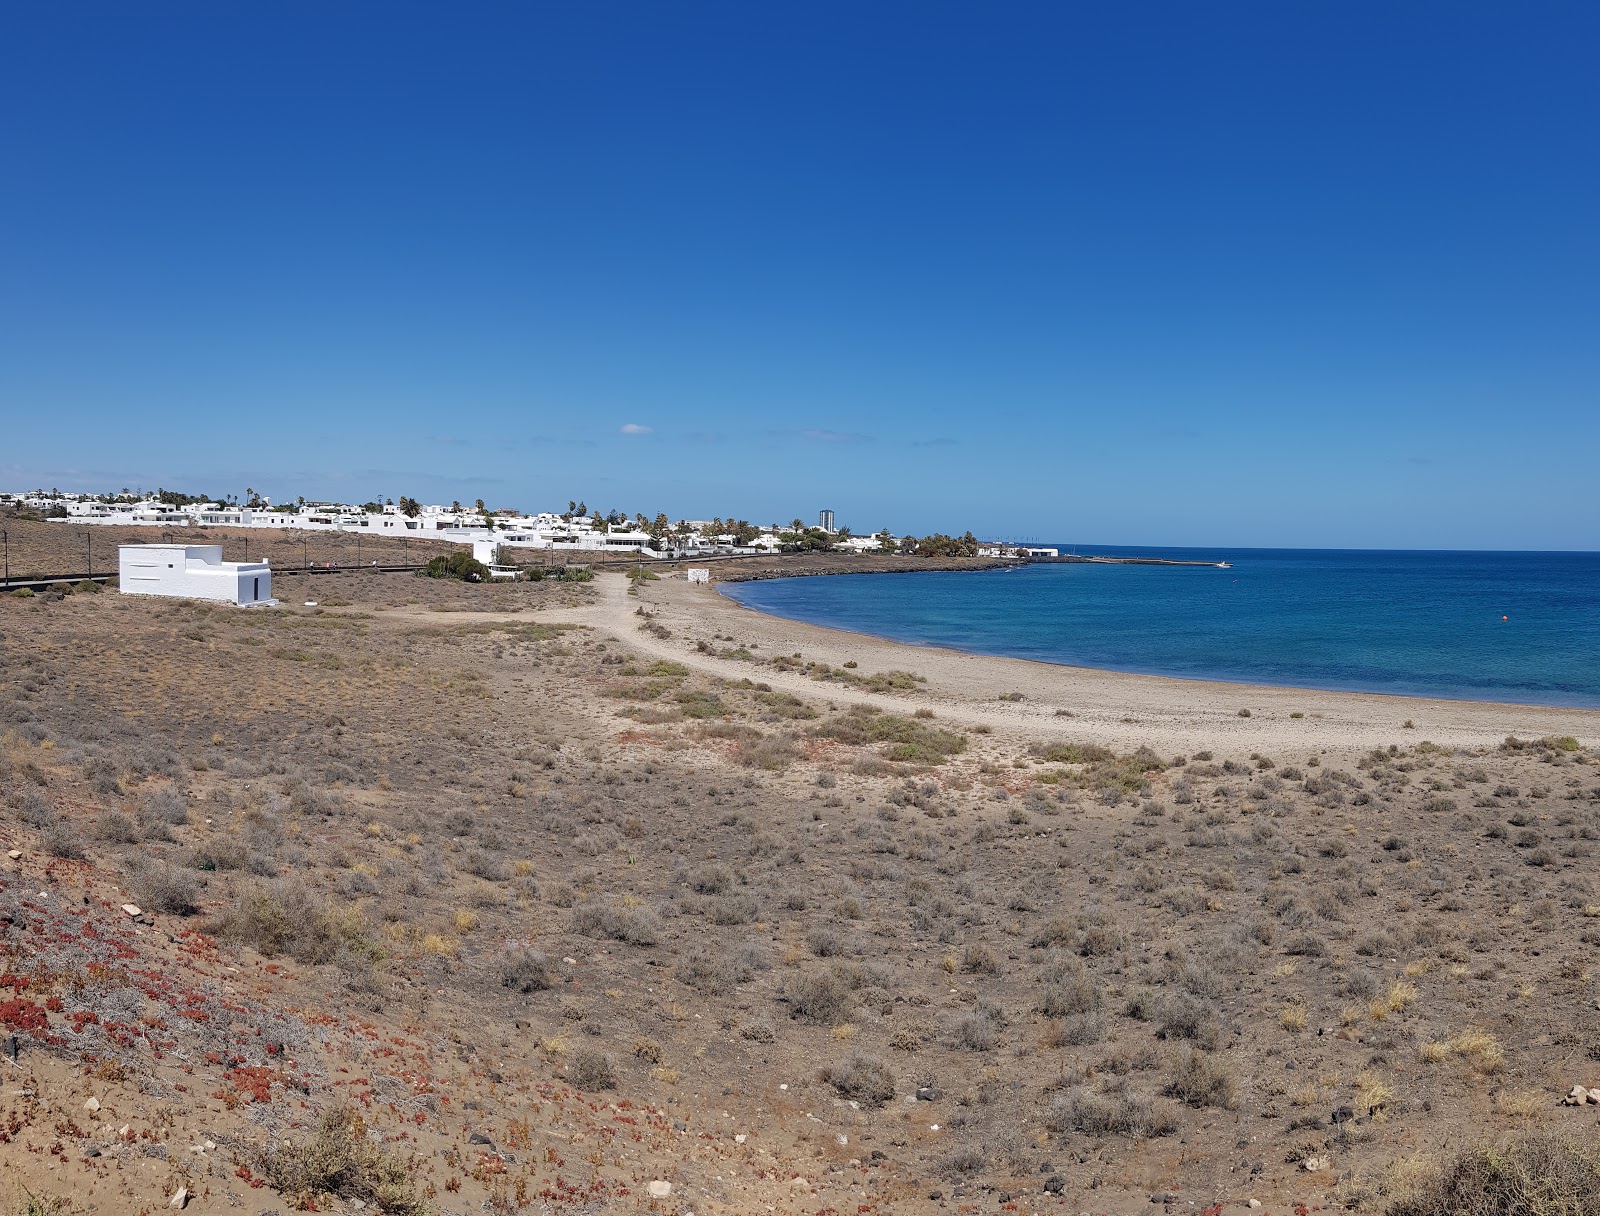 Photo of Playa del cable with small bay